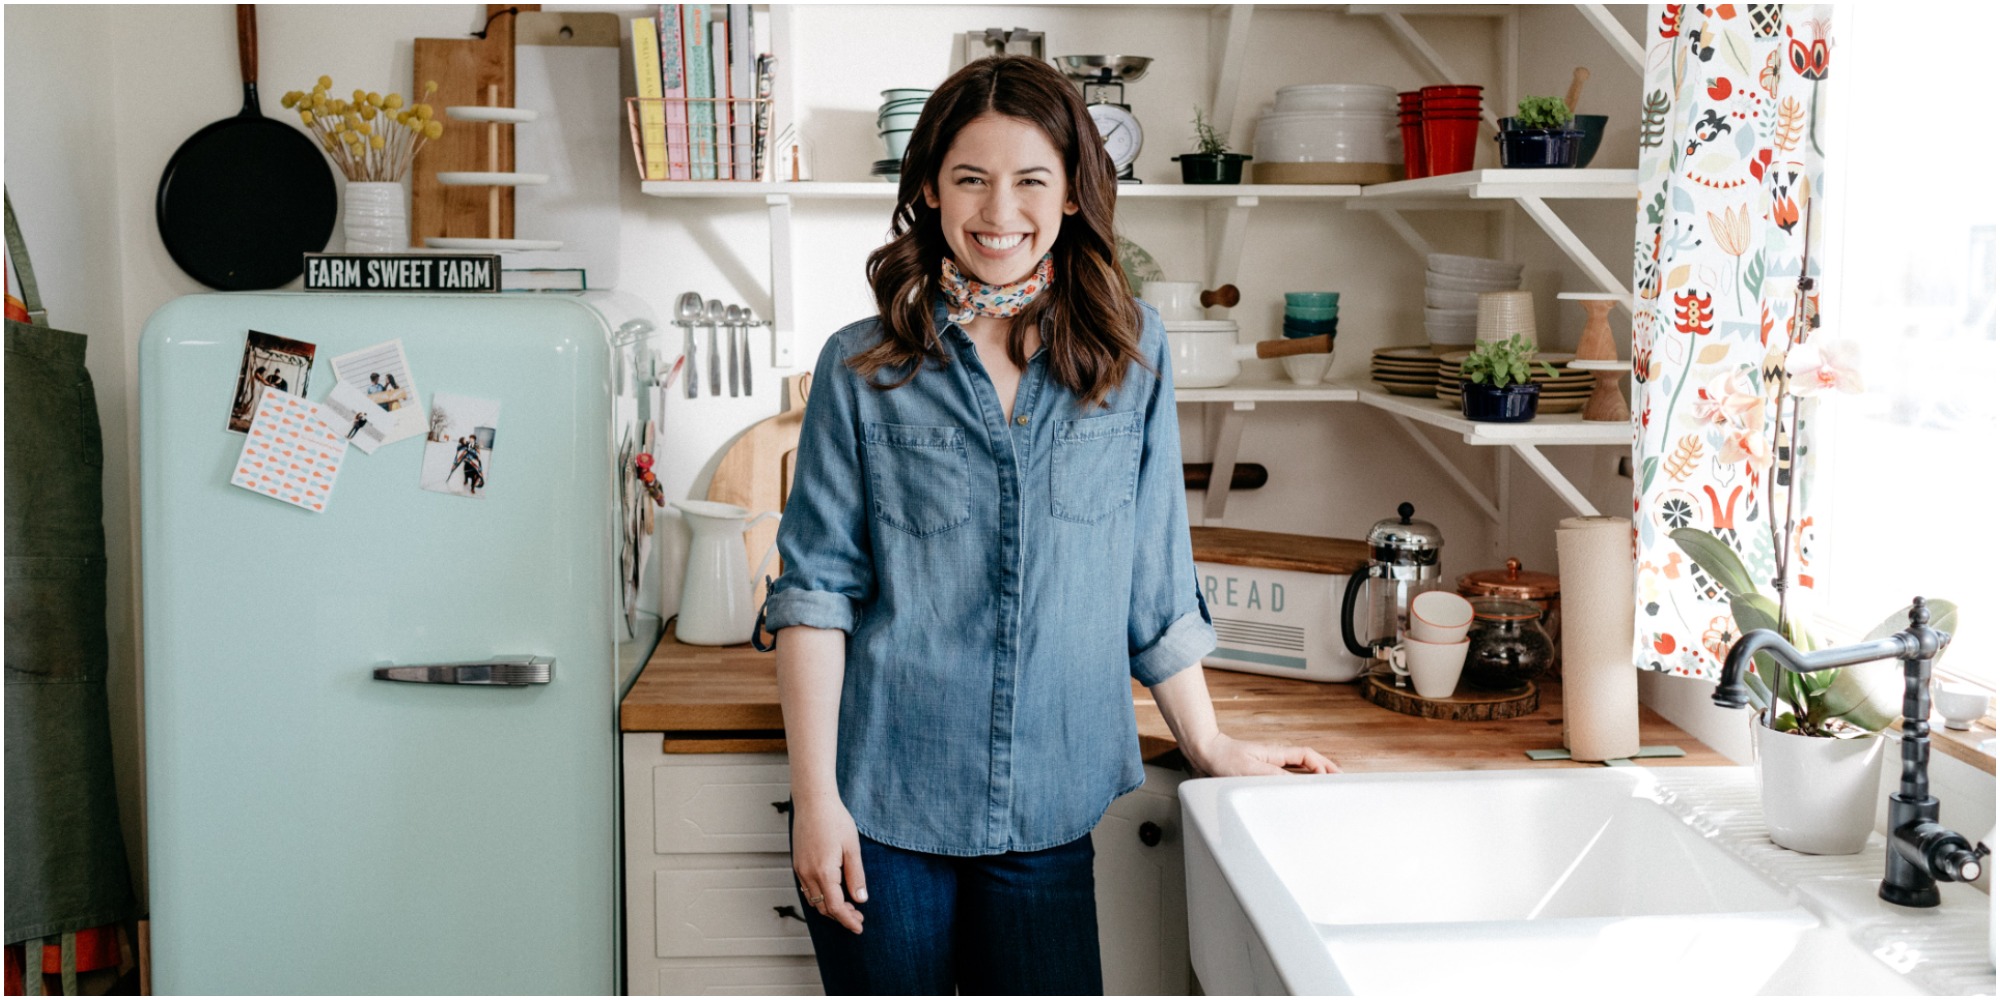 Molly Yeh stars on Food Network's "Girl Meets Farm" where she created an unforgettable popcorn salad.